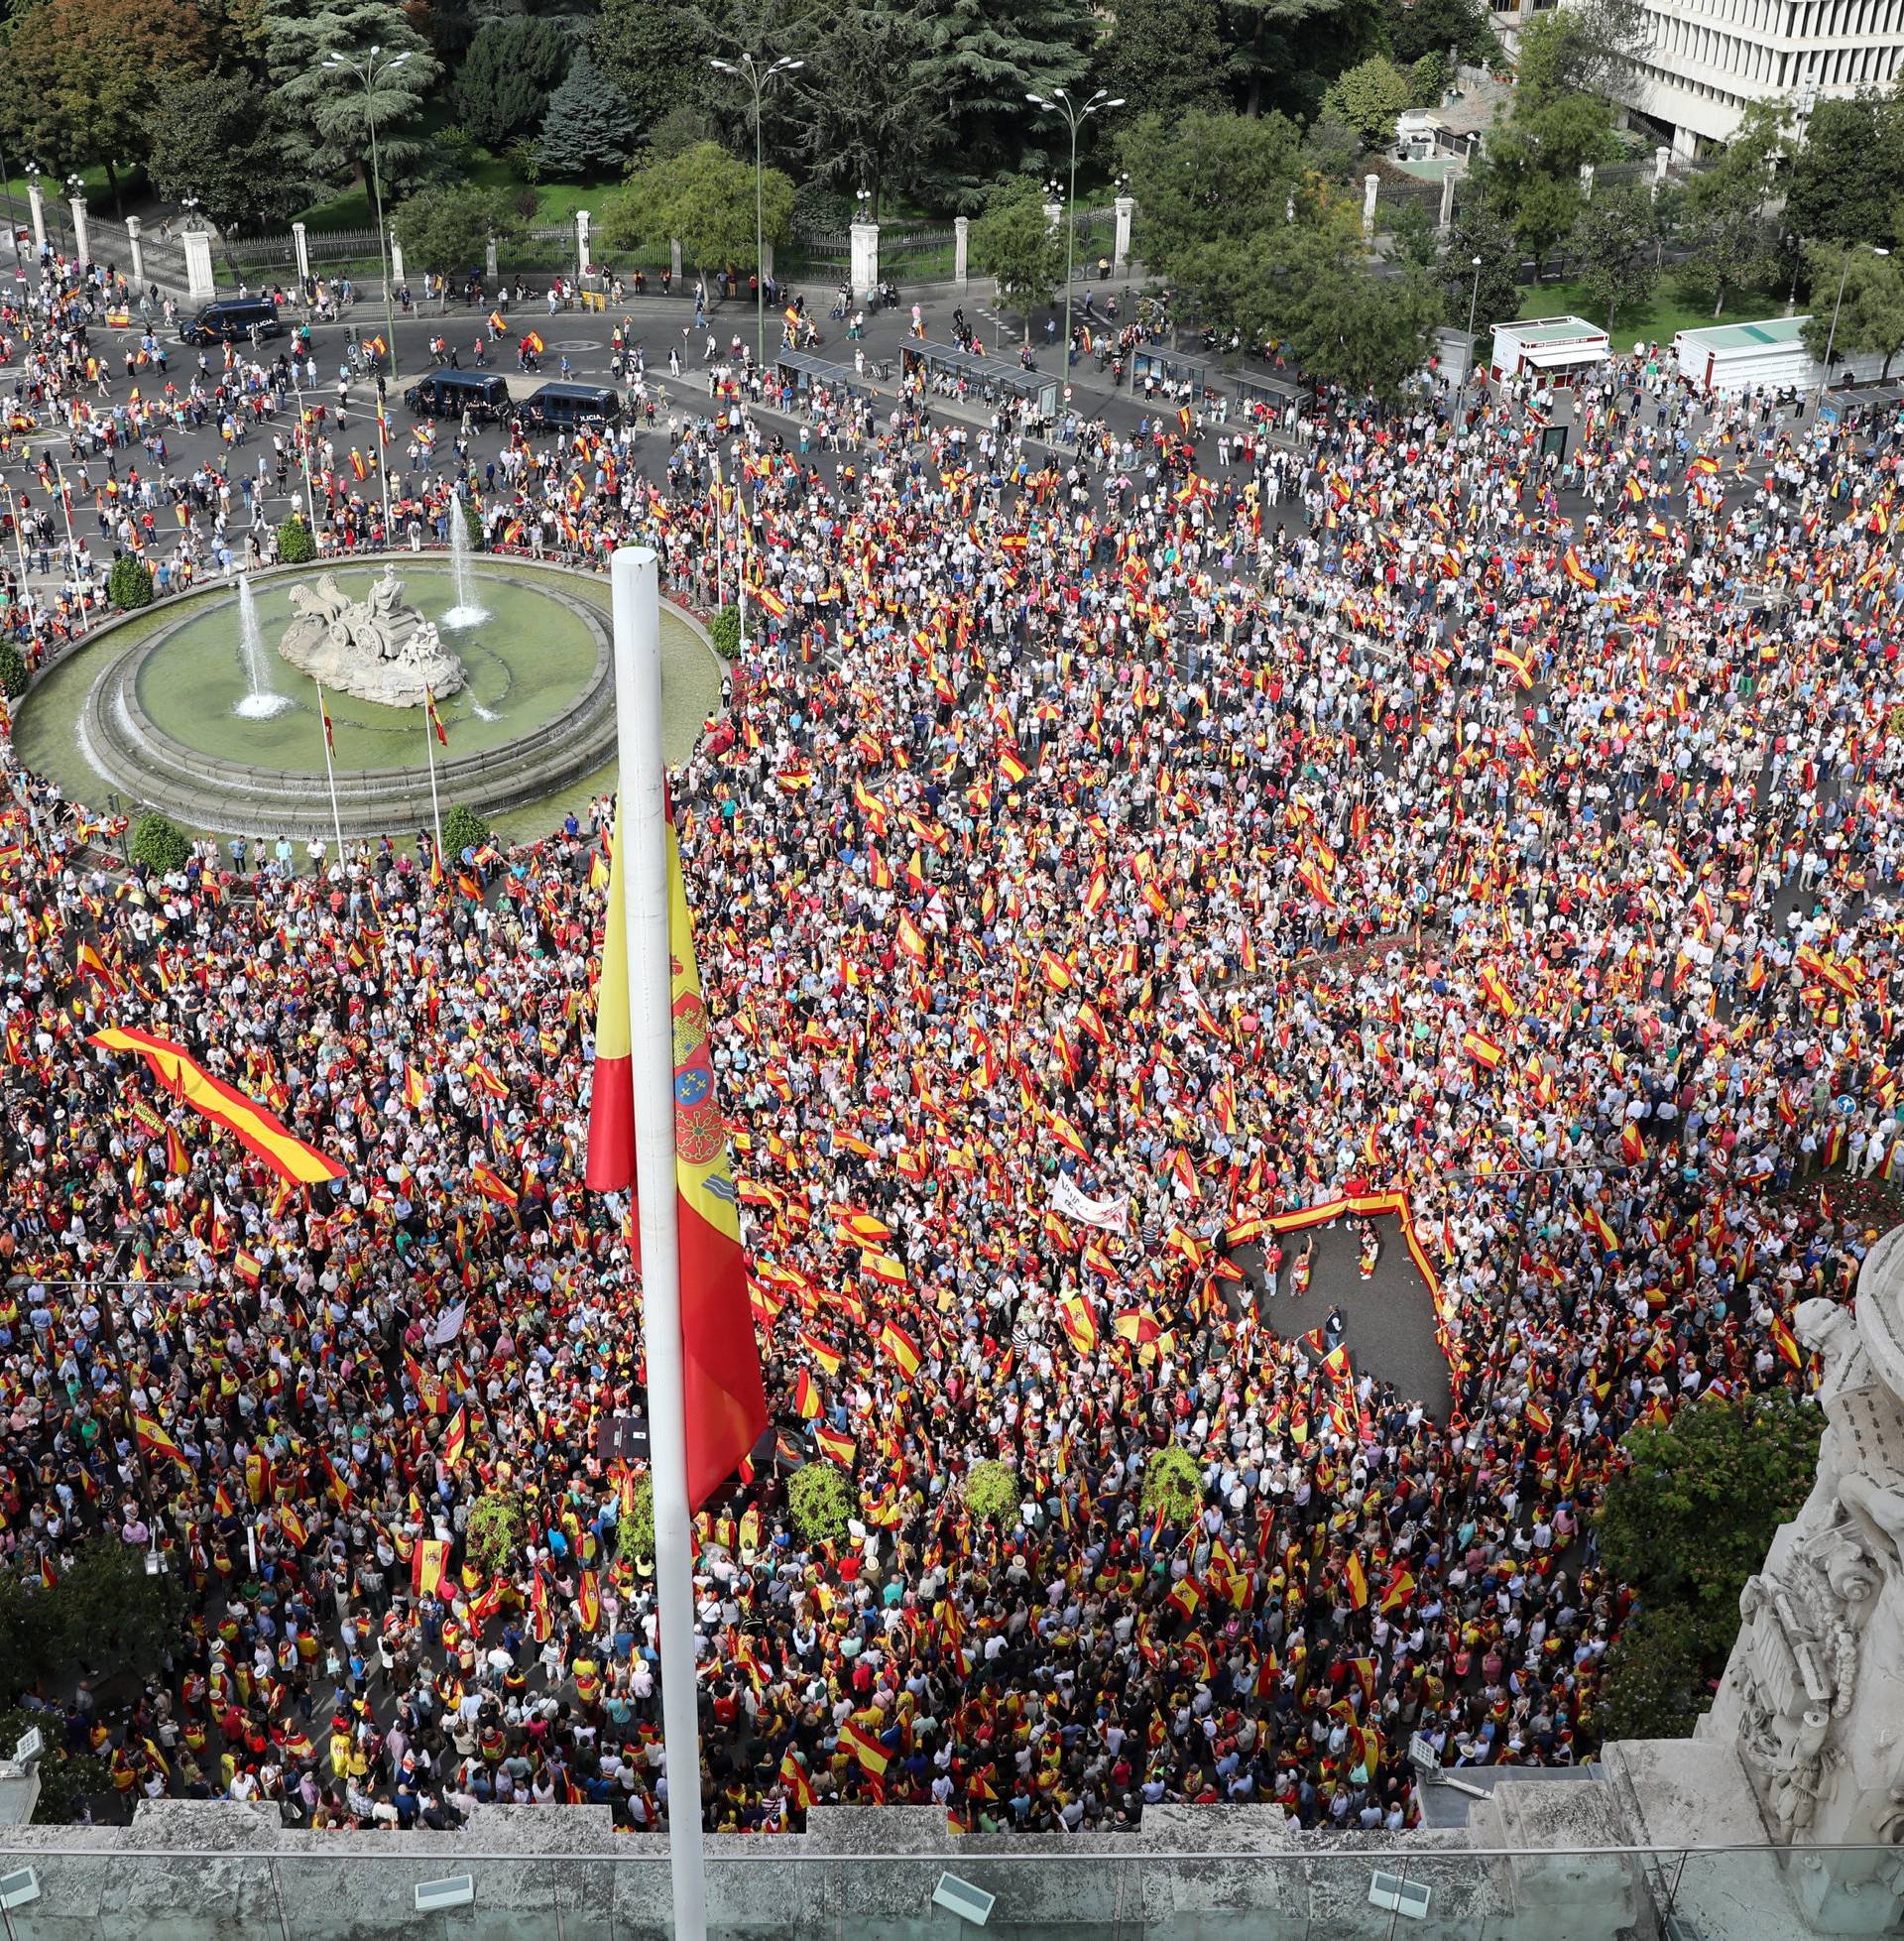 Demonstrators gather in front of city hall during a demonstration in favor of a unified Spain a day before the banned October 1 independence referendum, in Madrid